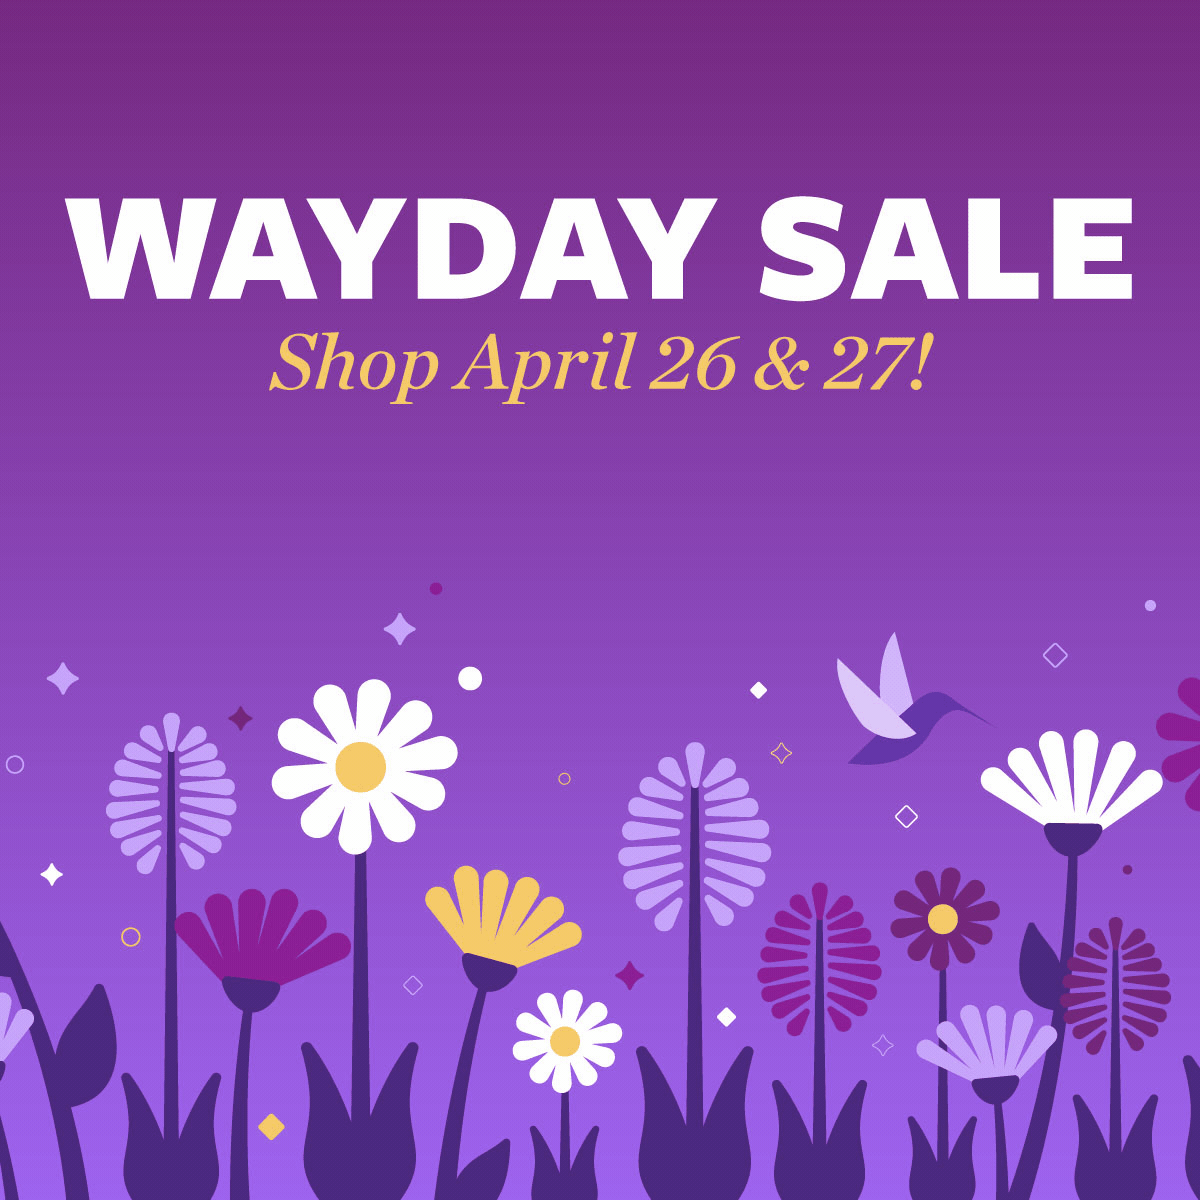 The Wayfair Way Day Sale Is the Best Time for Spring Savings on Outdoor Furniture and Accessories